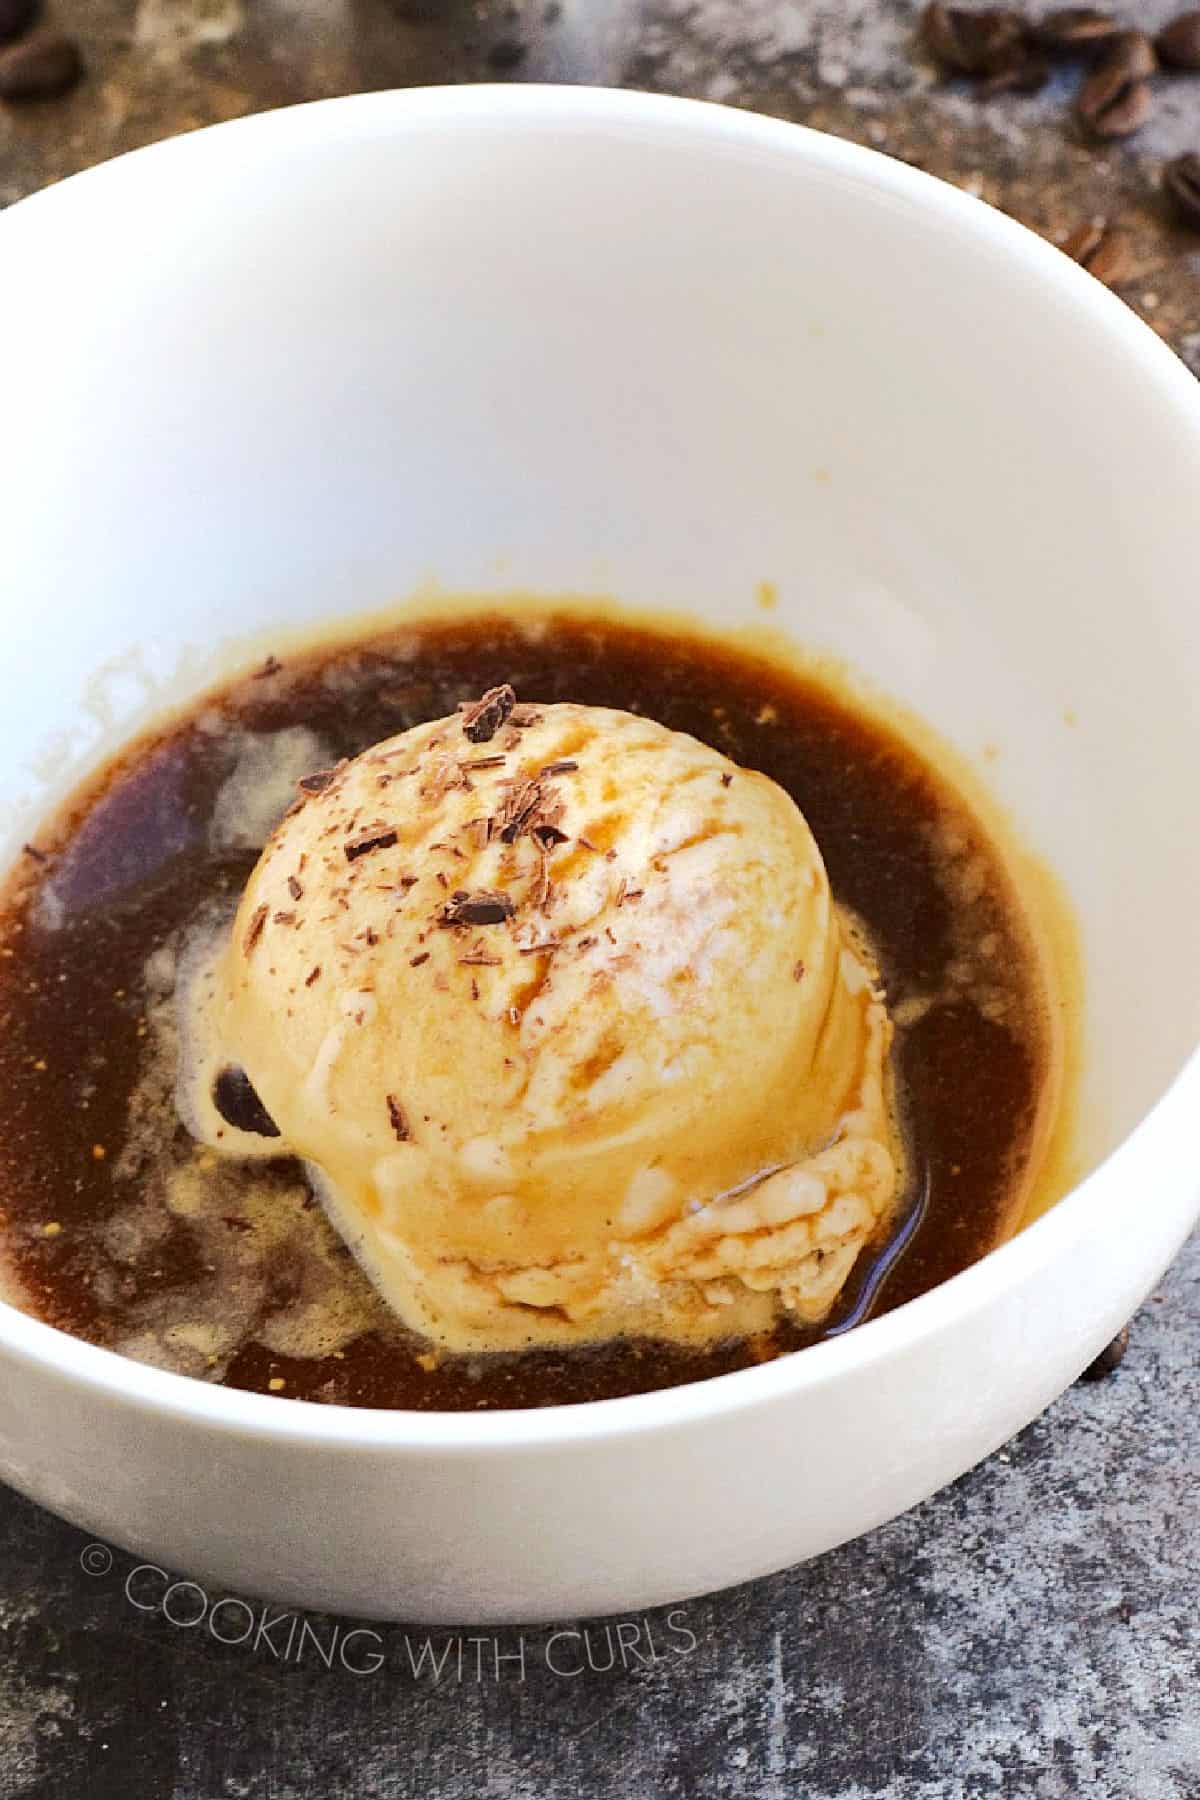 A scoop of ice cream topped with espresso and chocolate shavings in a white bowl.